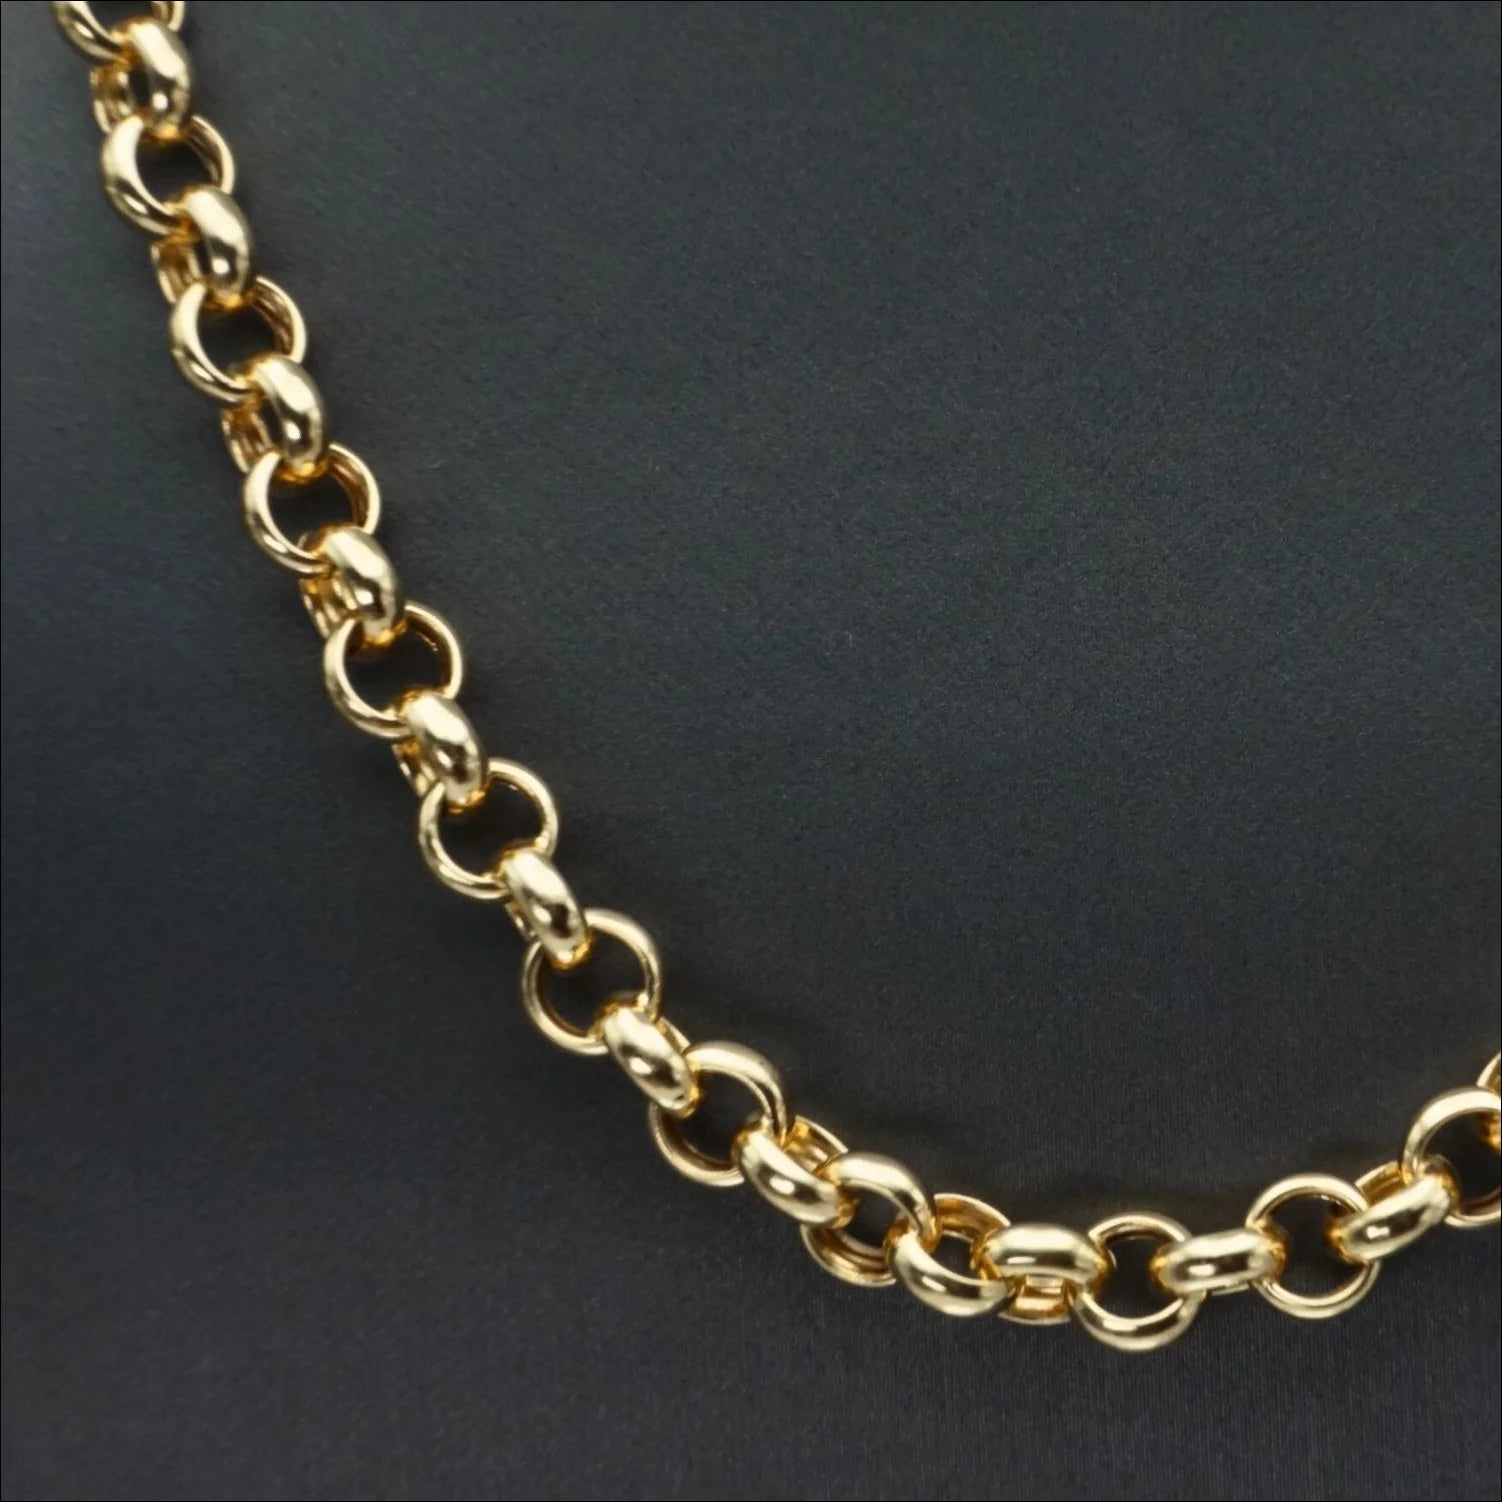 ’Exquisite 18k Gold Chain - Art Gold Jewelry’ | Chains